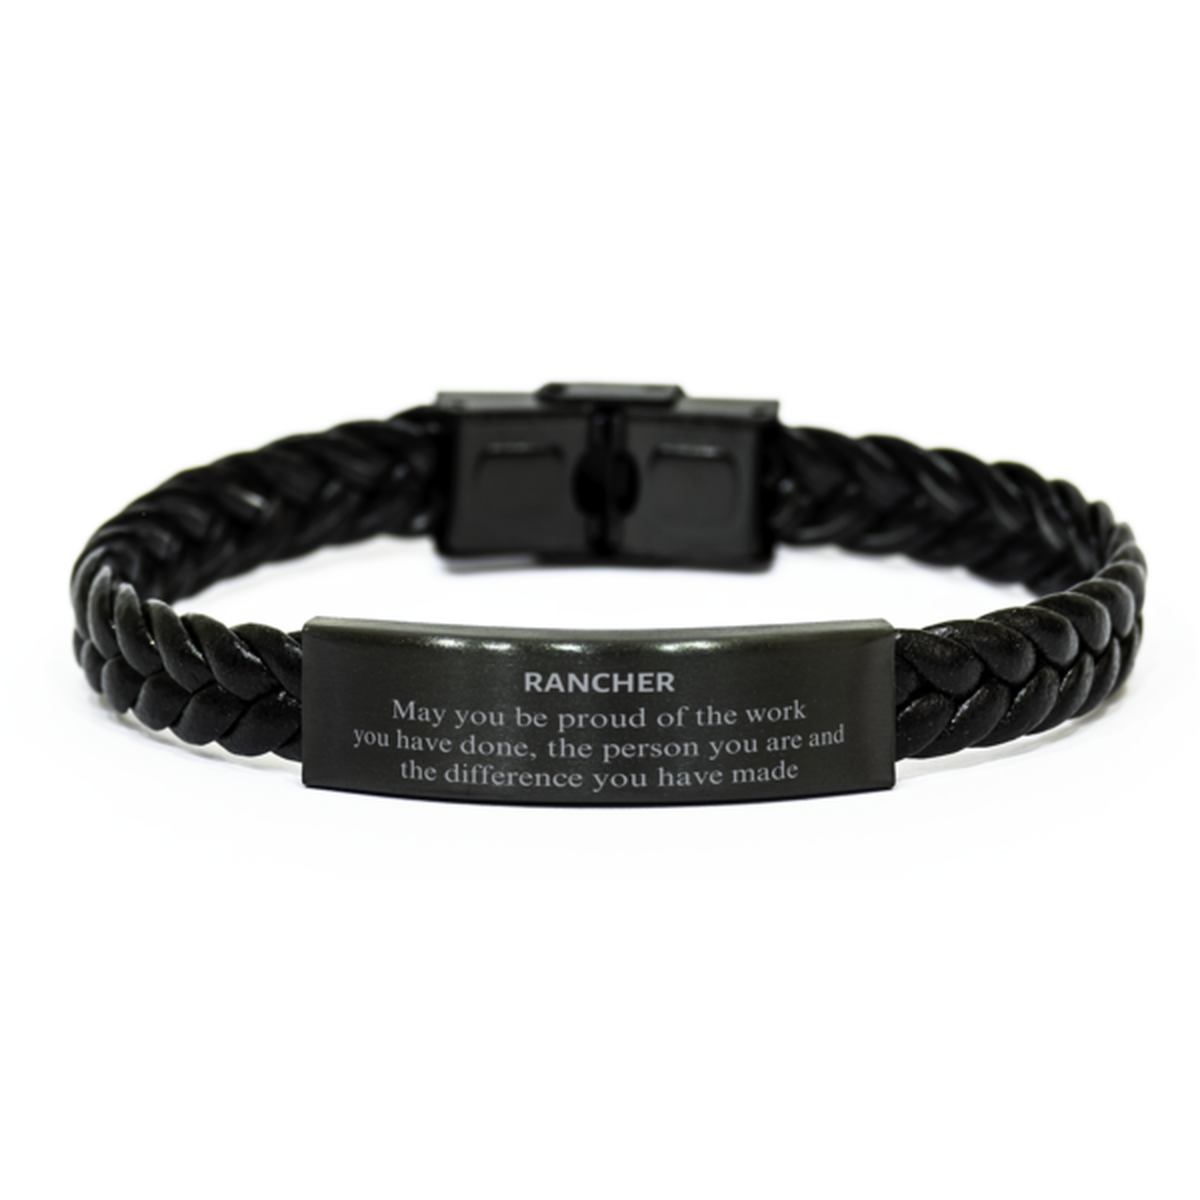 Rancher May you be proud of the work you have done, Retirement Rancher Braided Leather Bracelet for Colleague Appreciation Gifts Amazing for Rancher